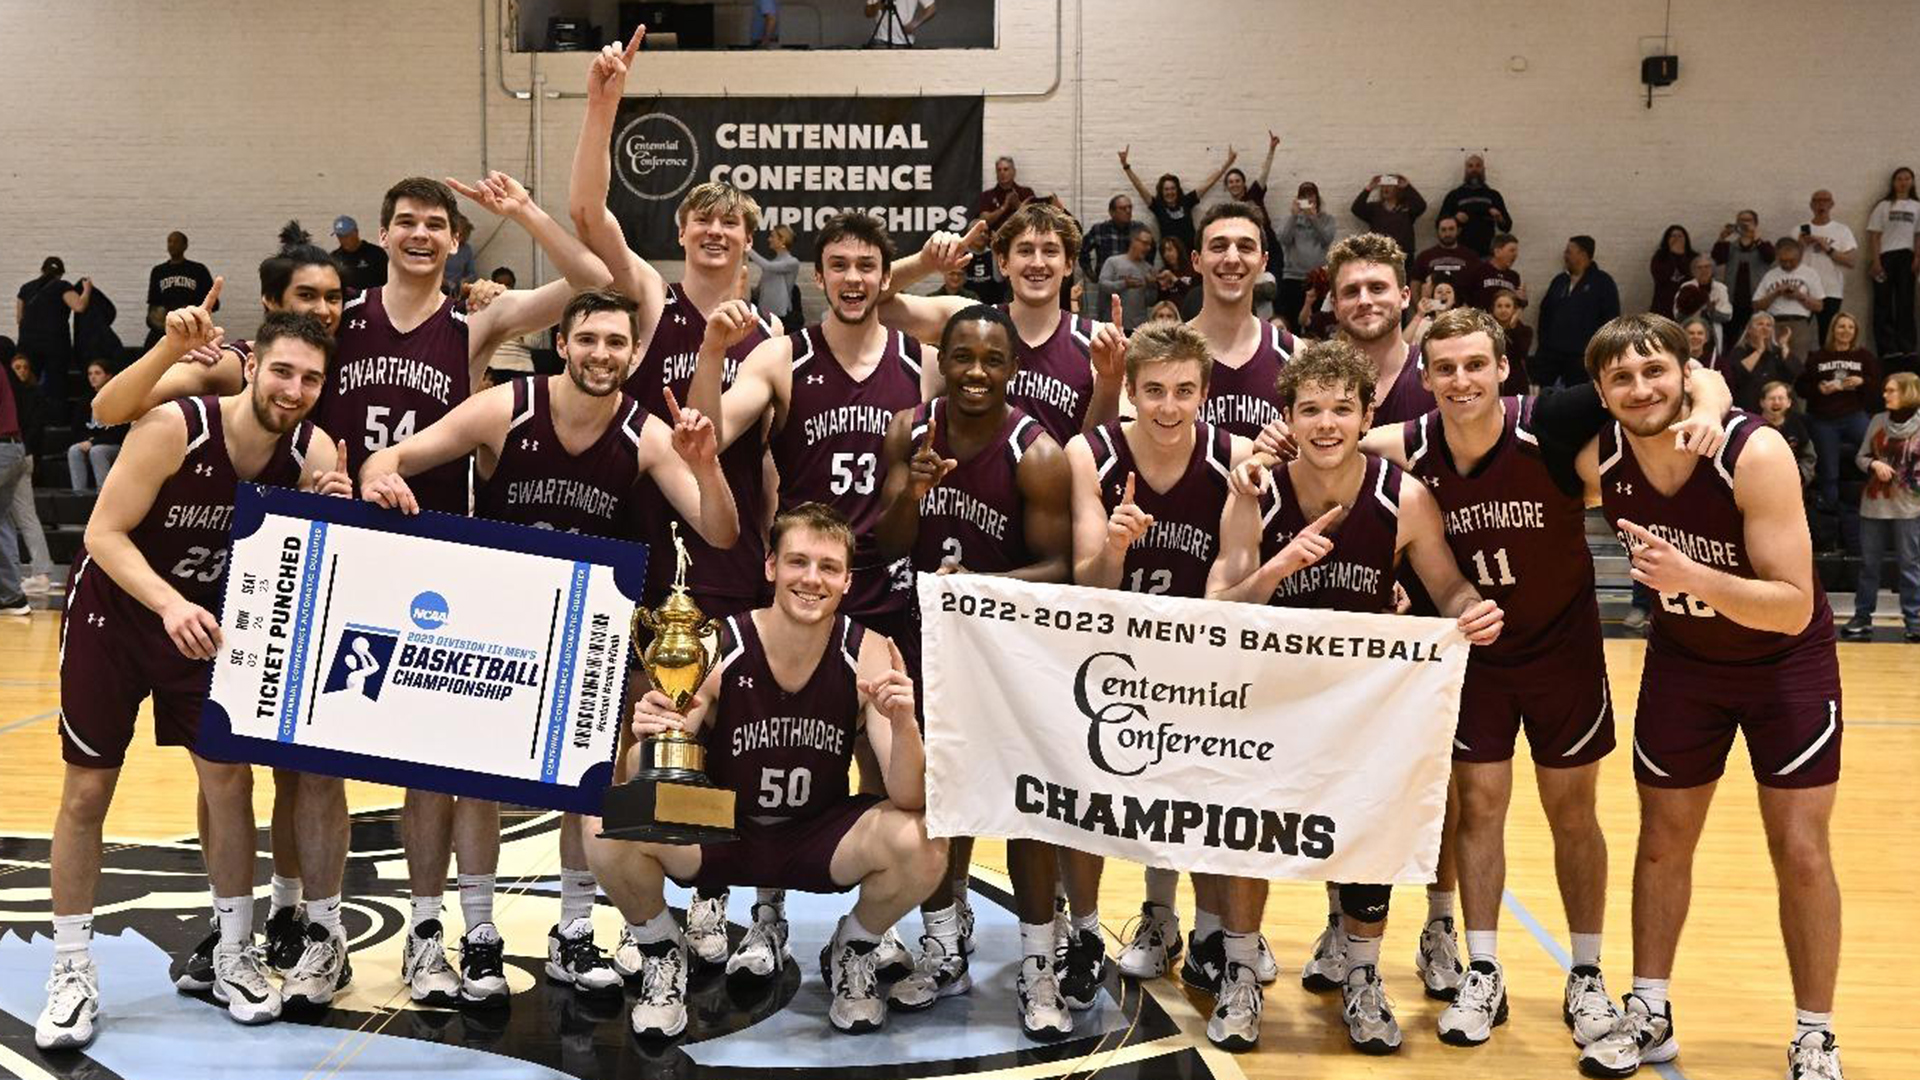 Second-Half Surge Lifts Swarthmore to Third Centennial Title